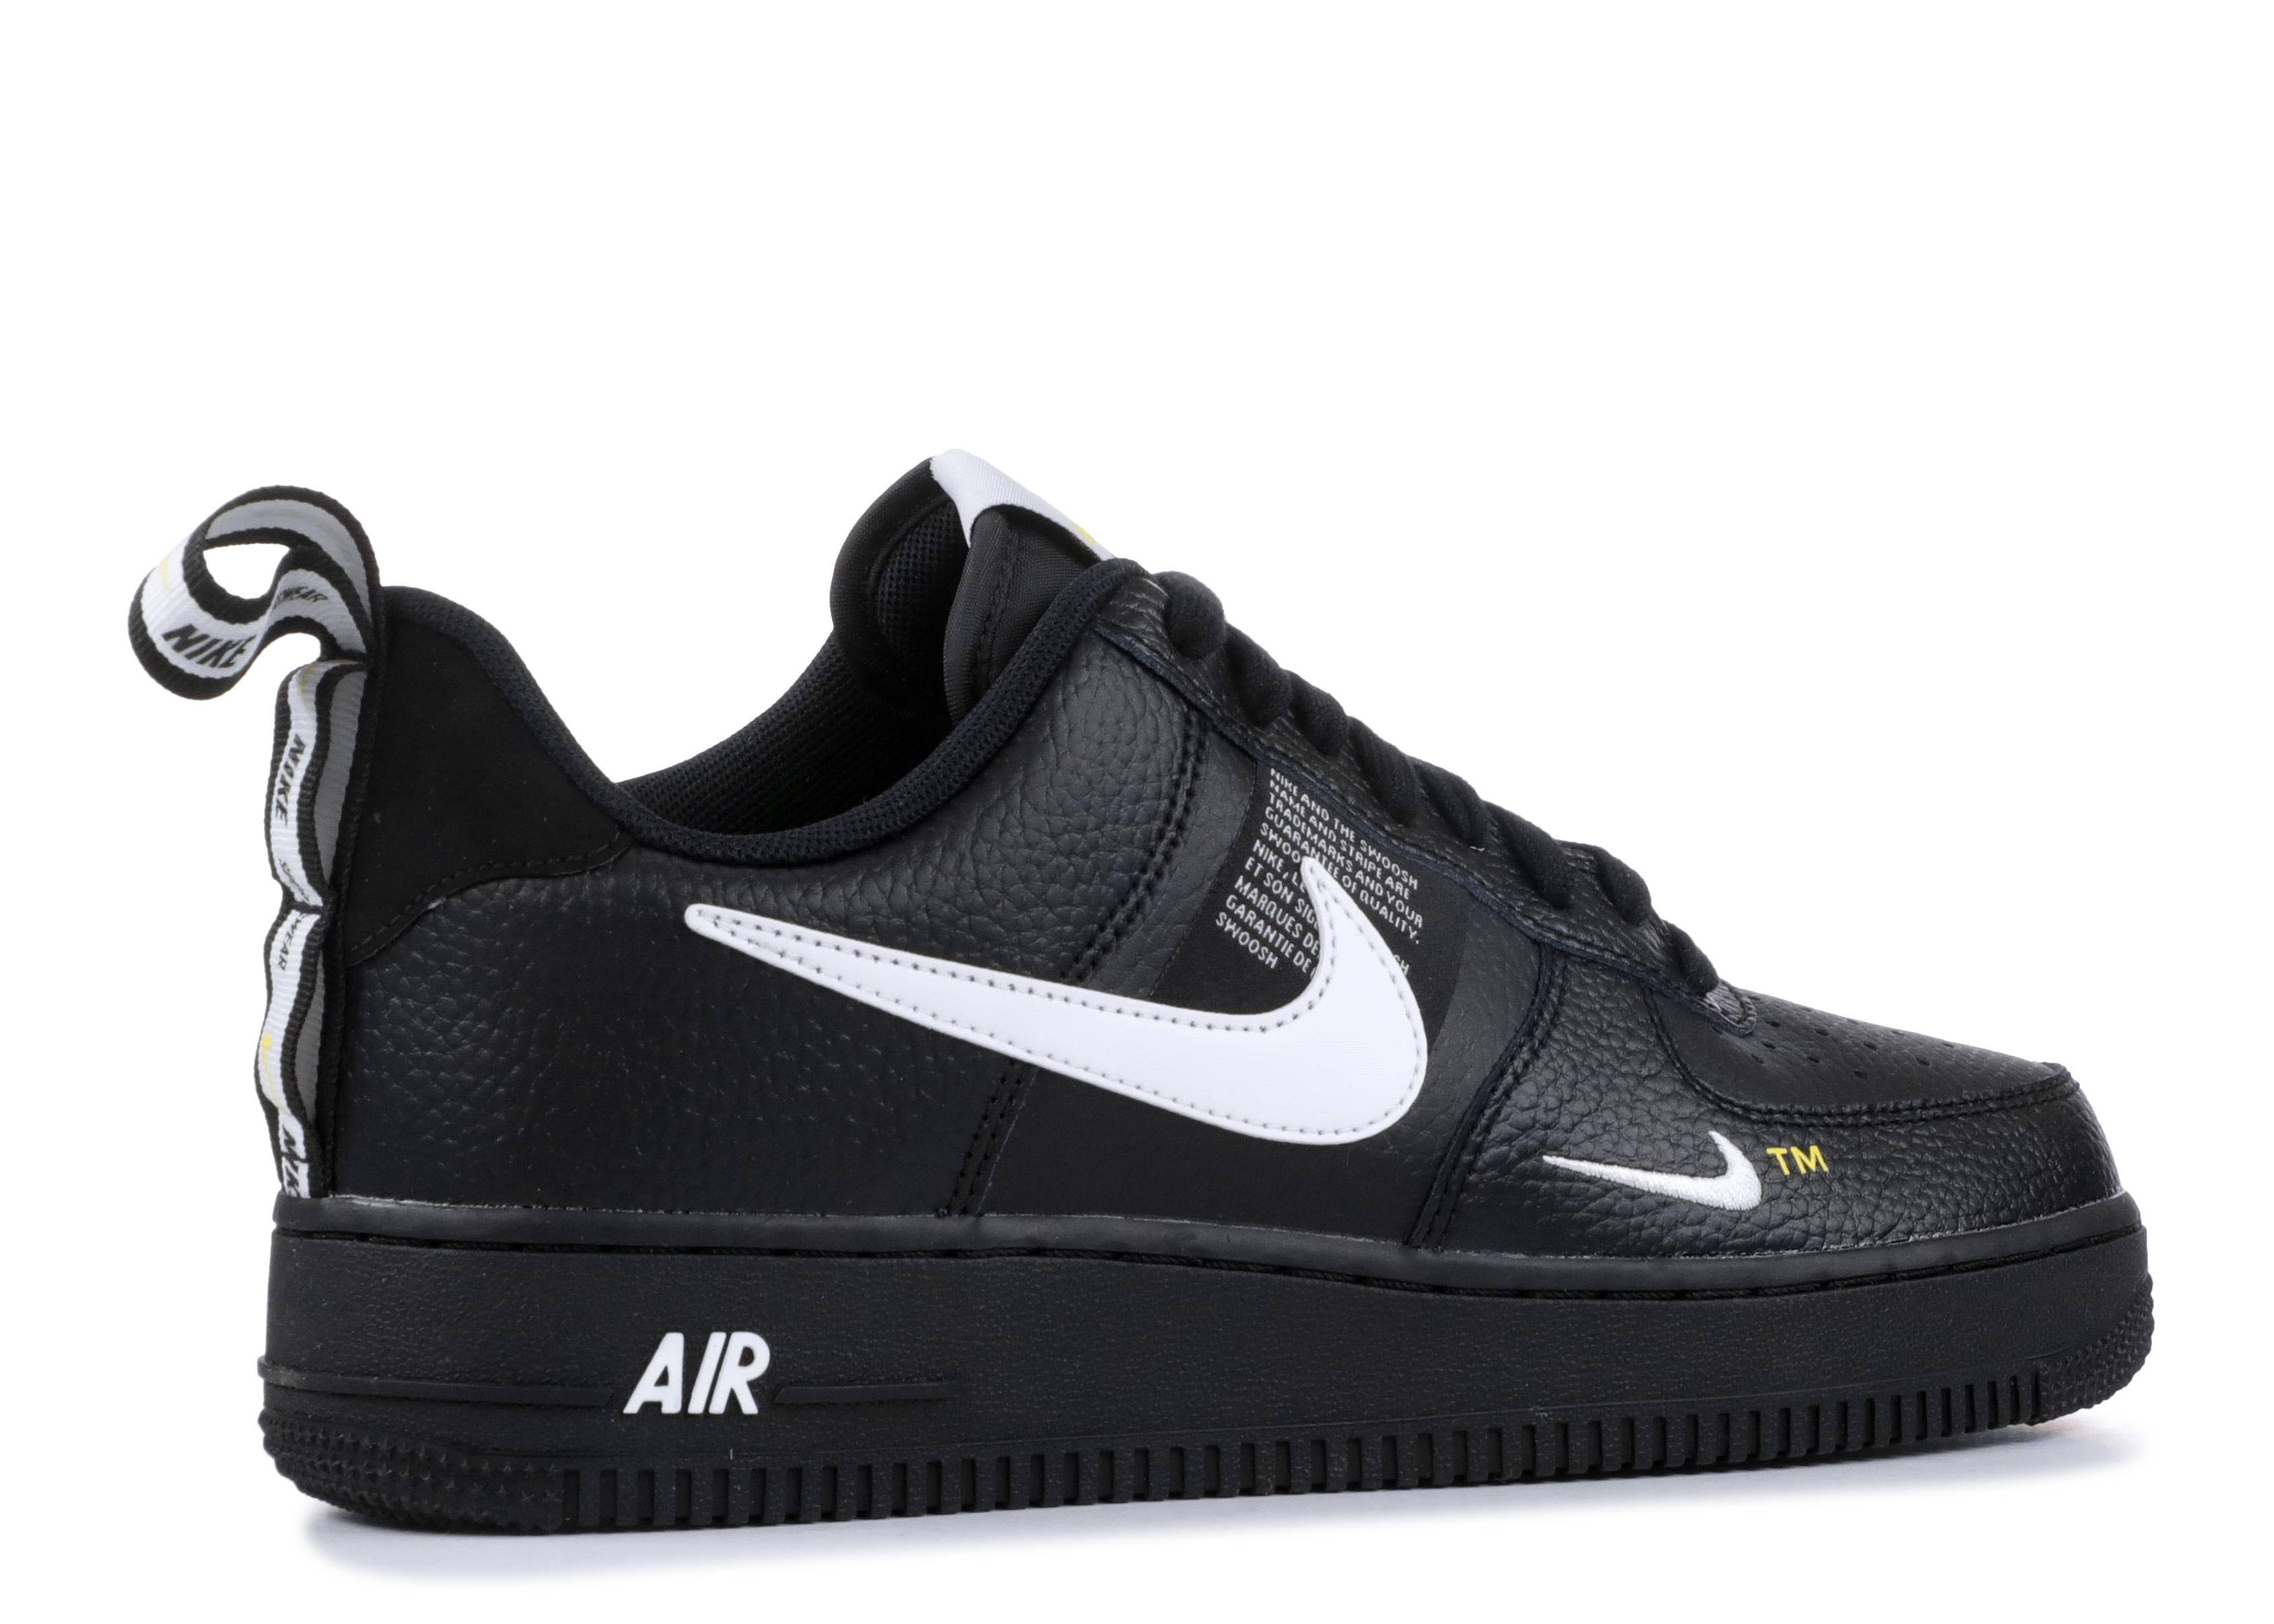 white & black air force 1 07 lv8 utility trainers